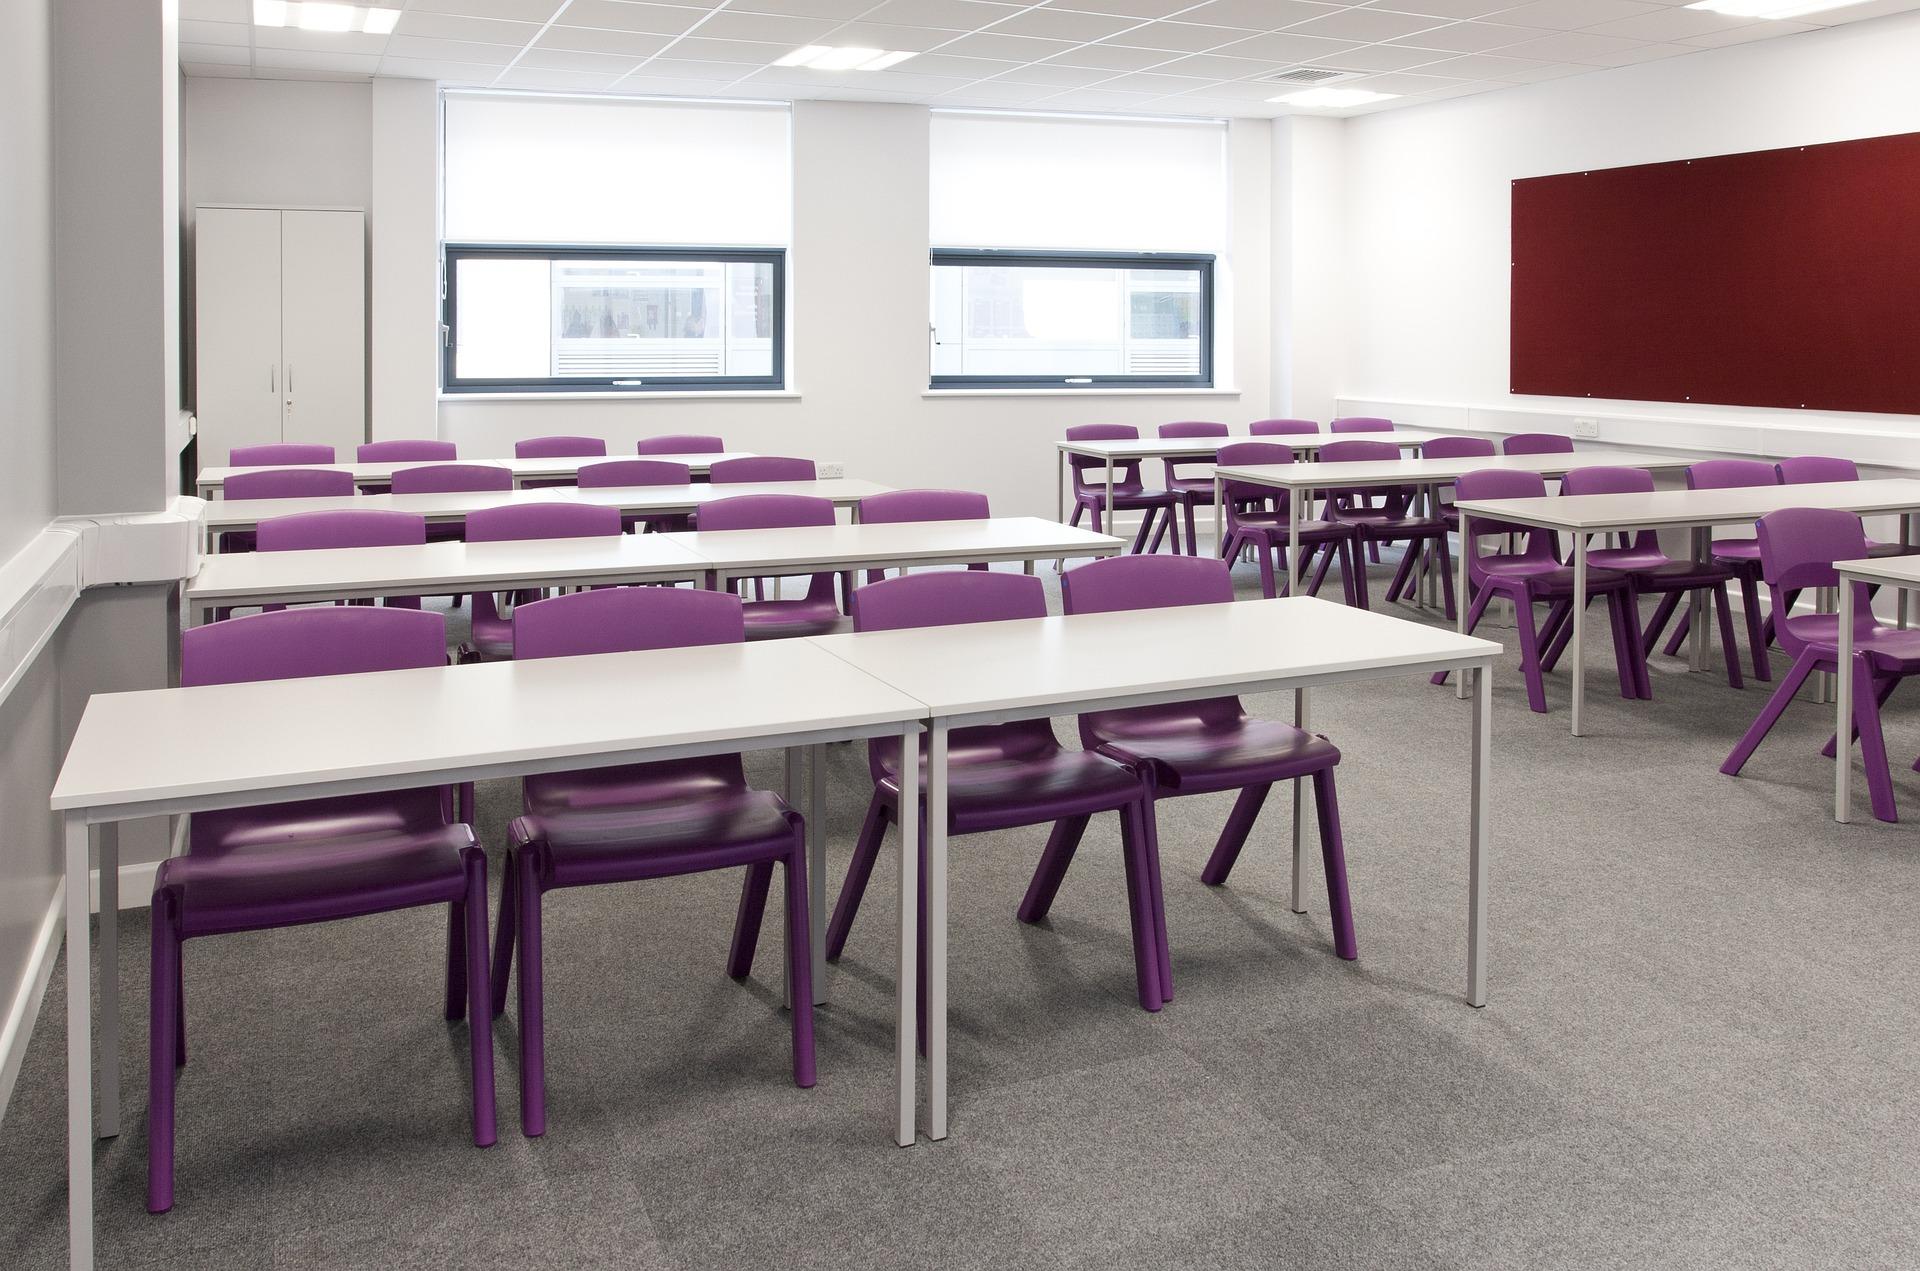 Classroom, chairs and tables